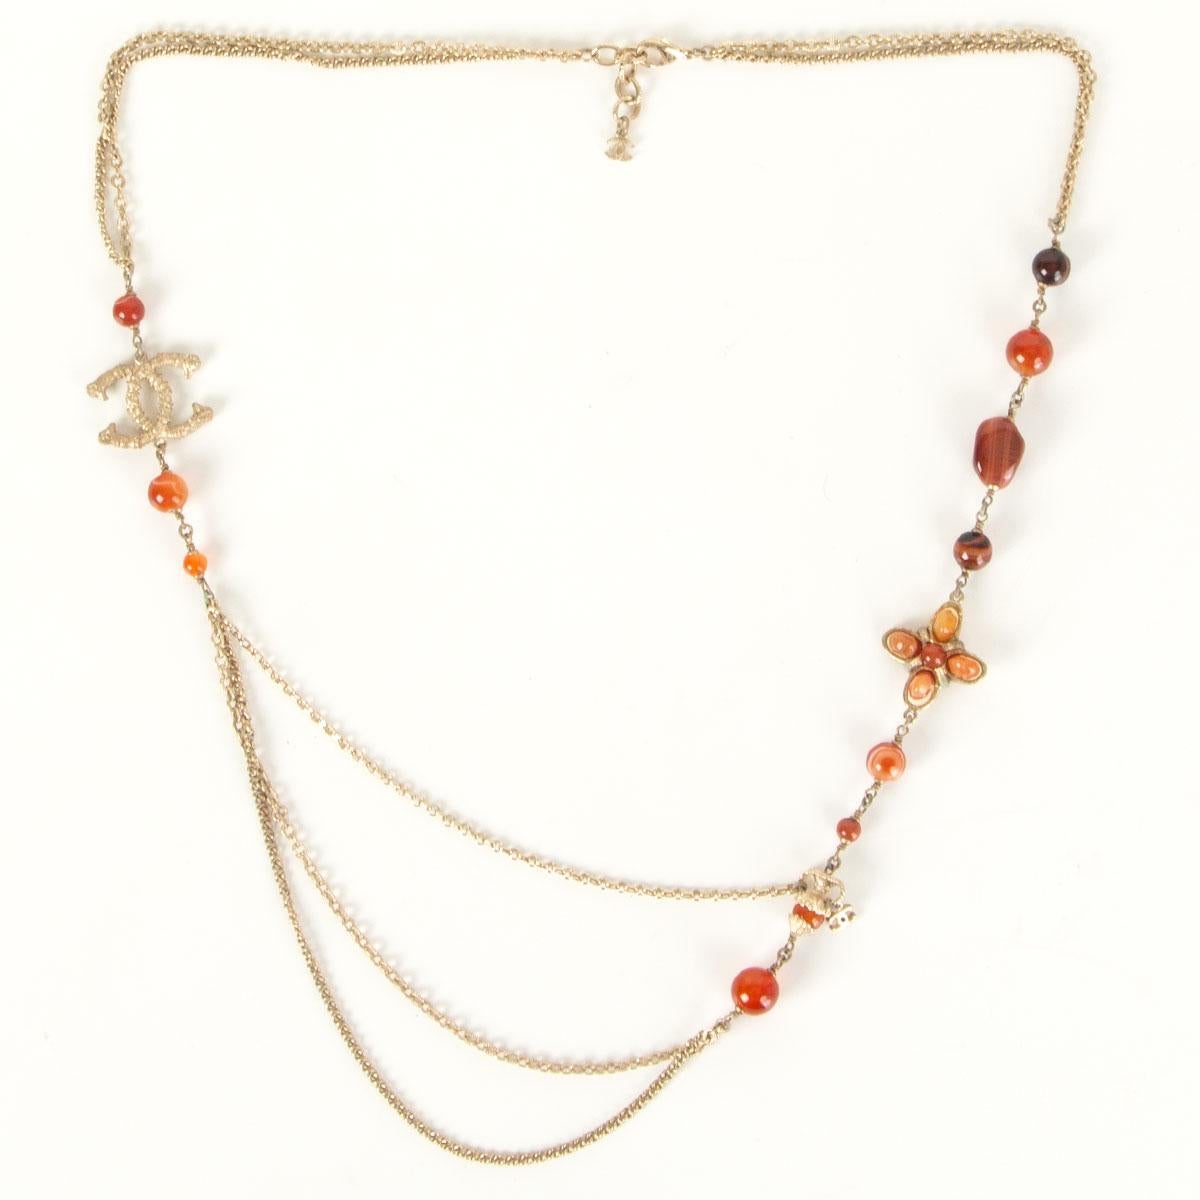 Women's CHANEL orange & gold 2018 CRUISE PARIS GREECE BEADED Chain Necklace For Sale